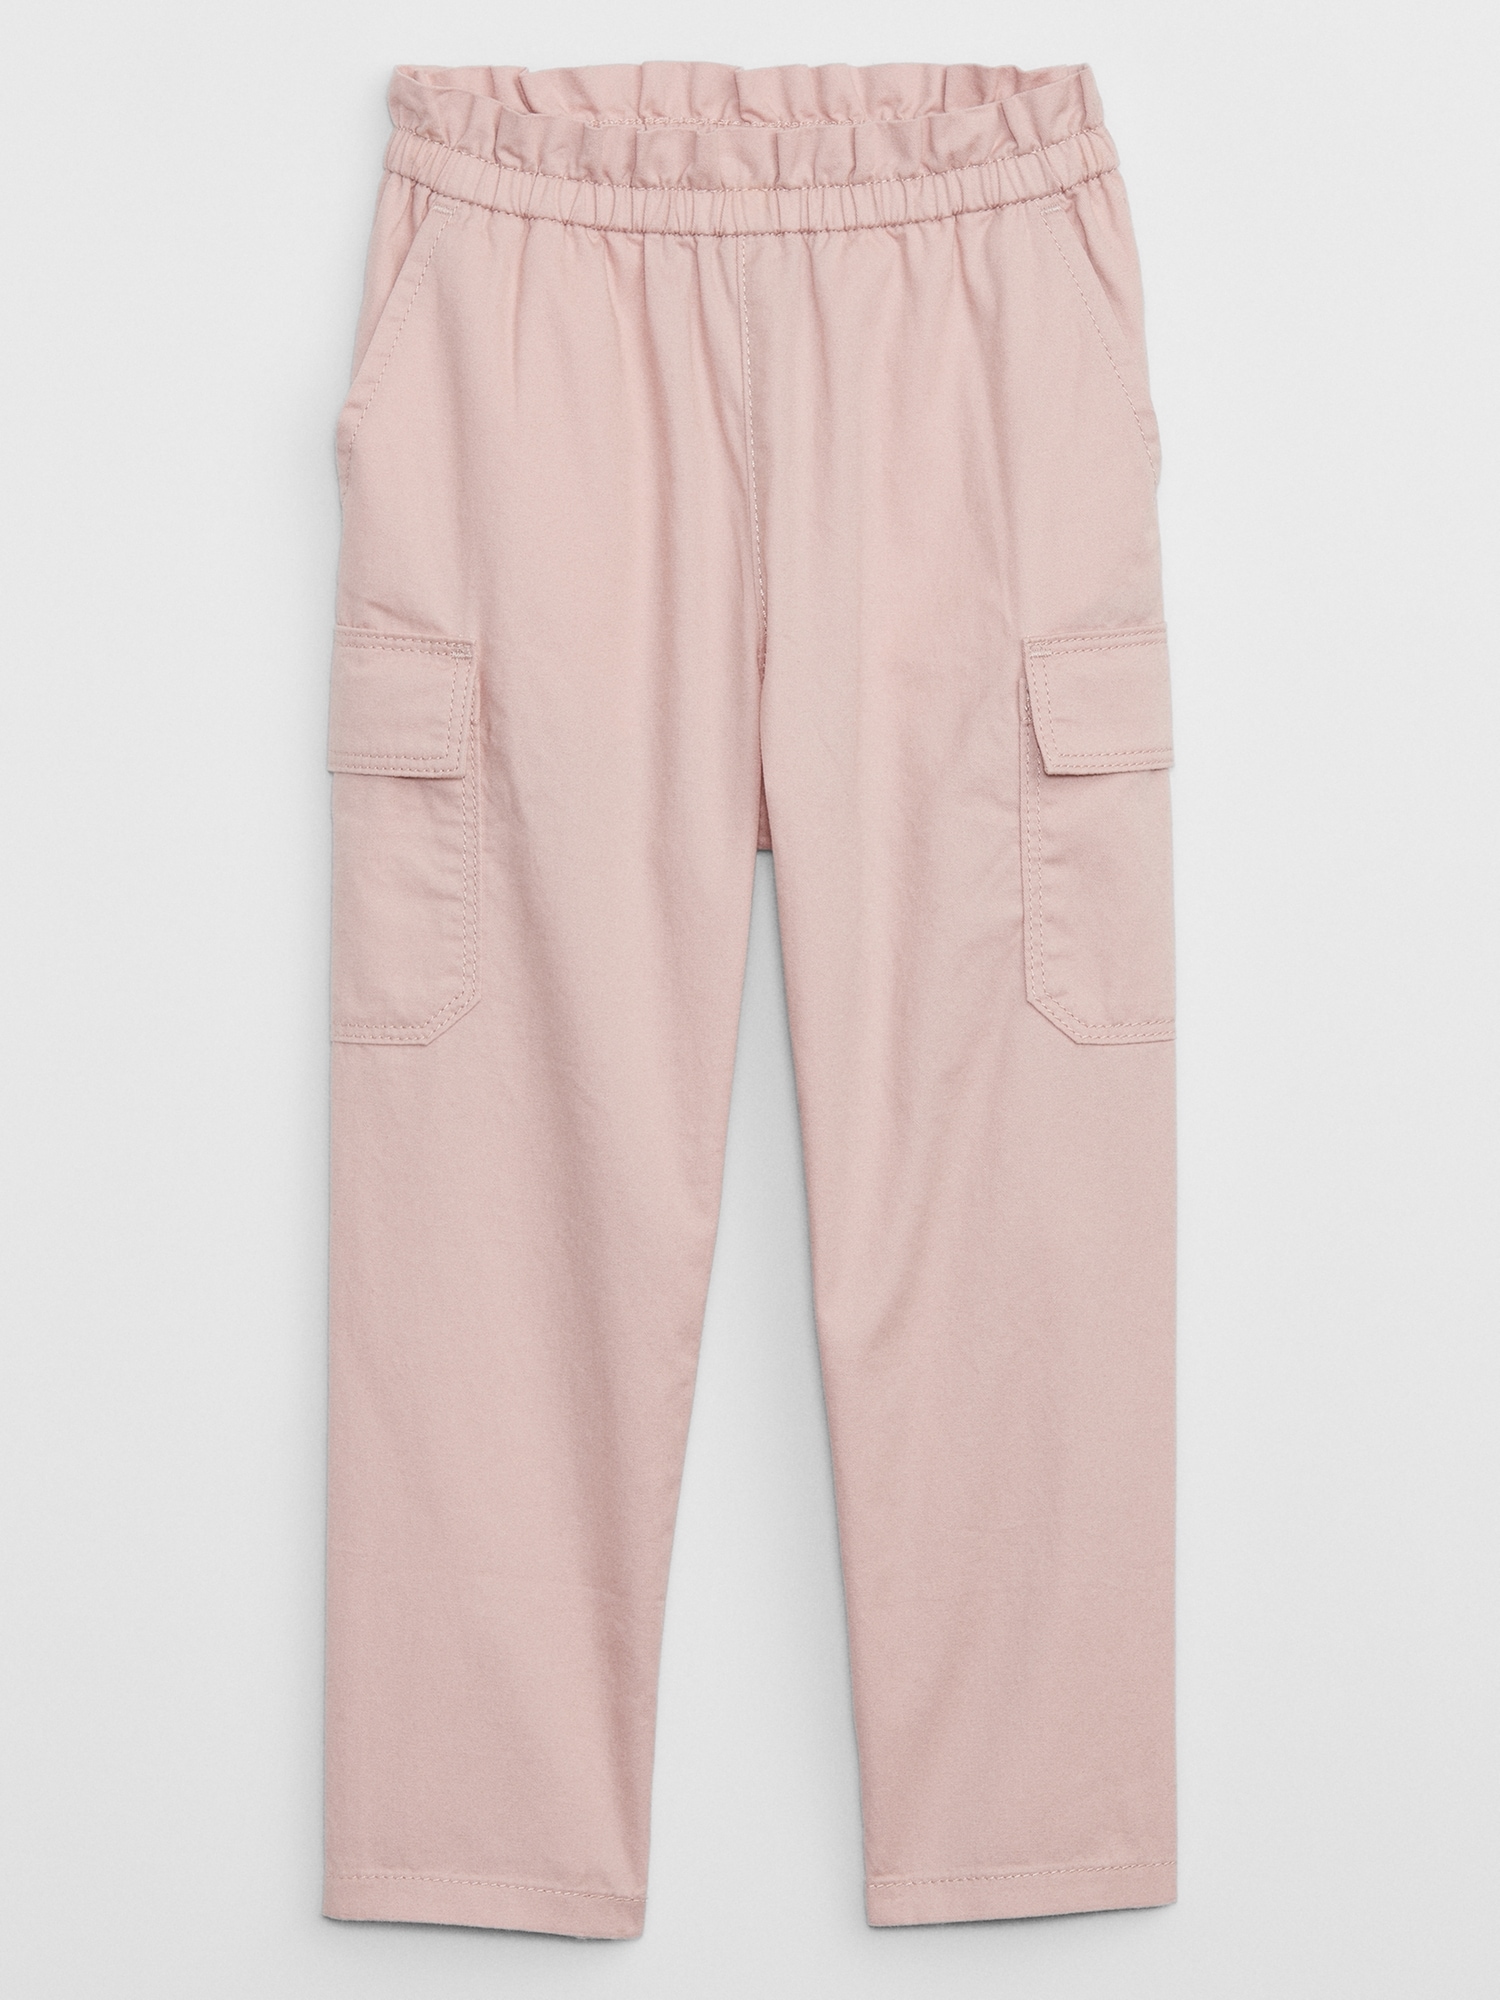 Women's Stretch Woven Cargo Pants 27 - All in Motion Clay Pink L